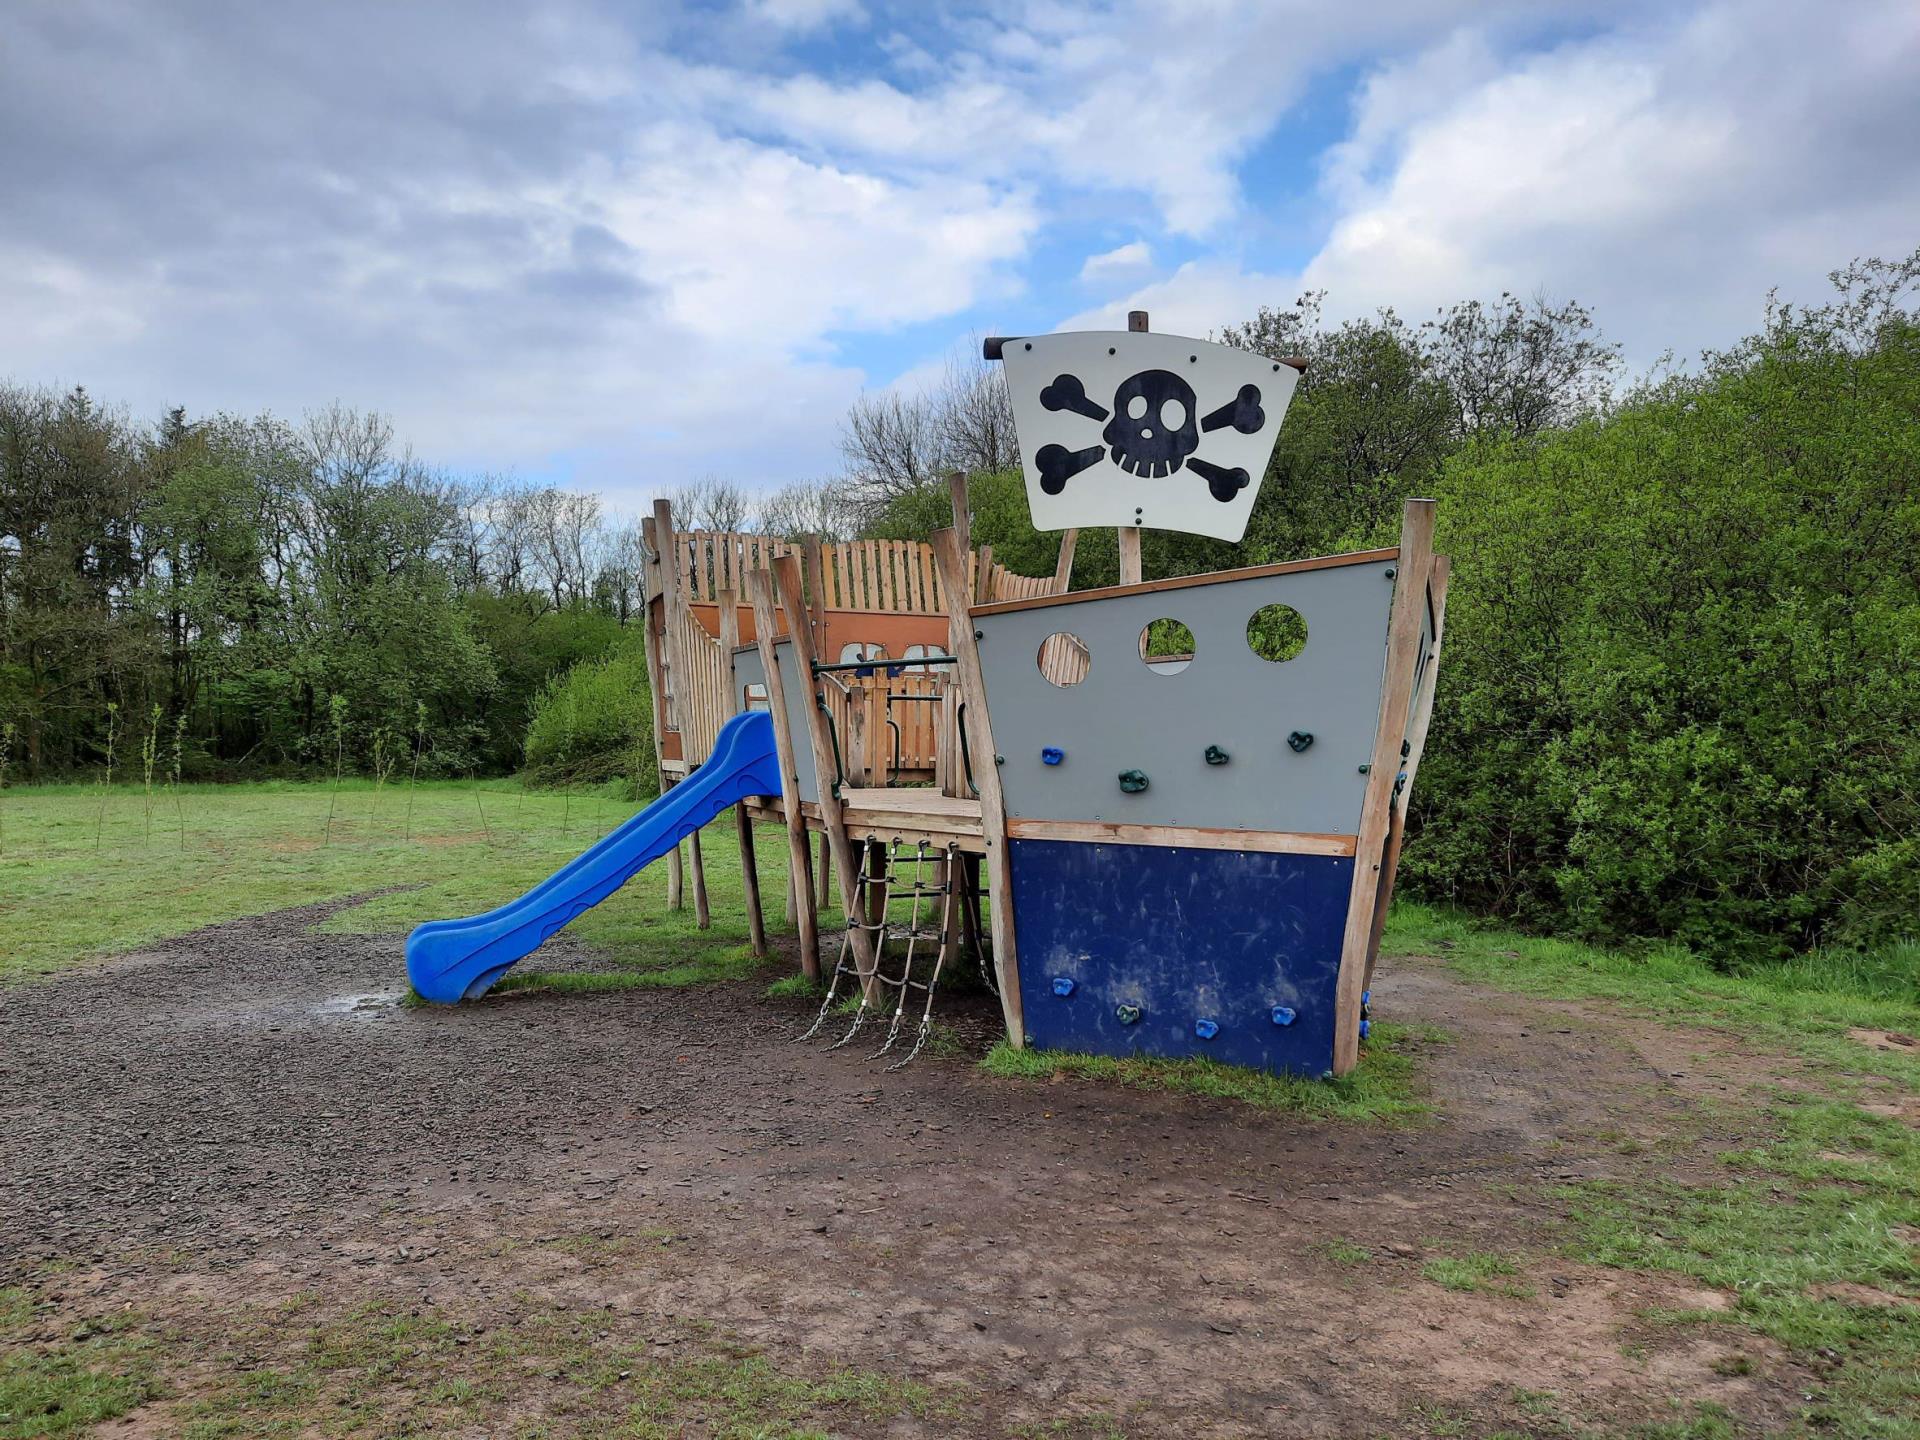 Pirate play ship at Scolton Manor